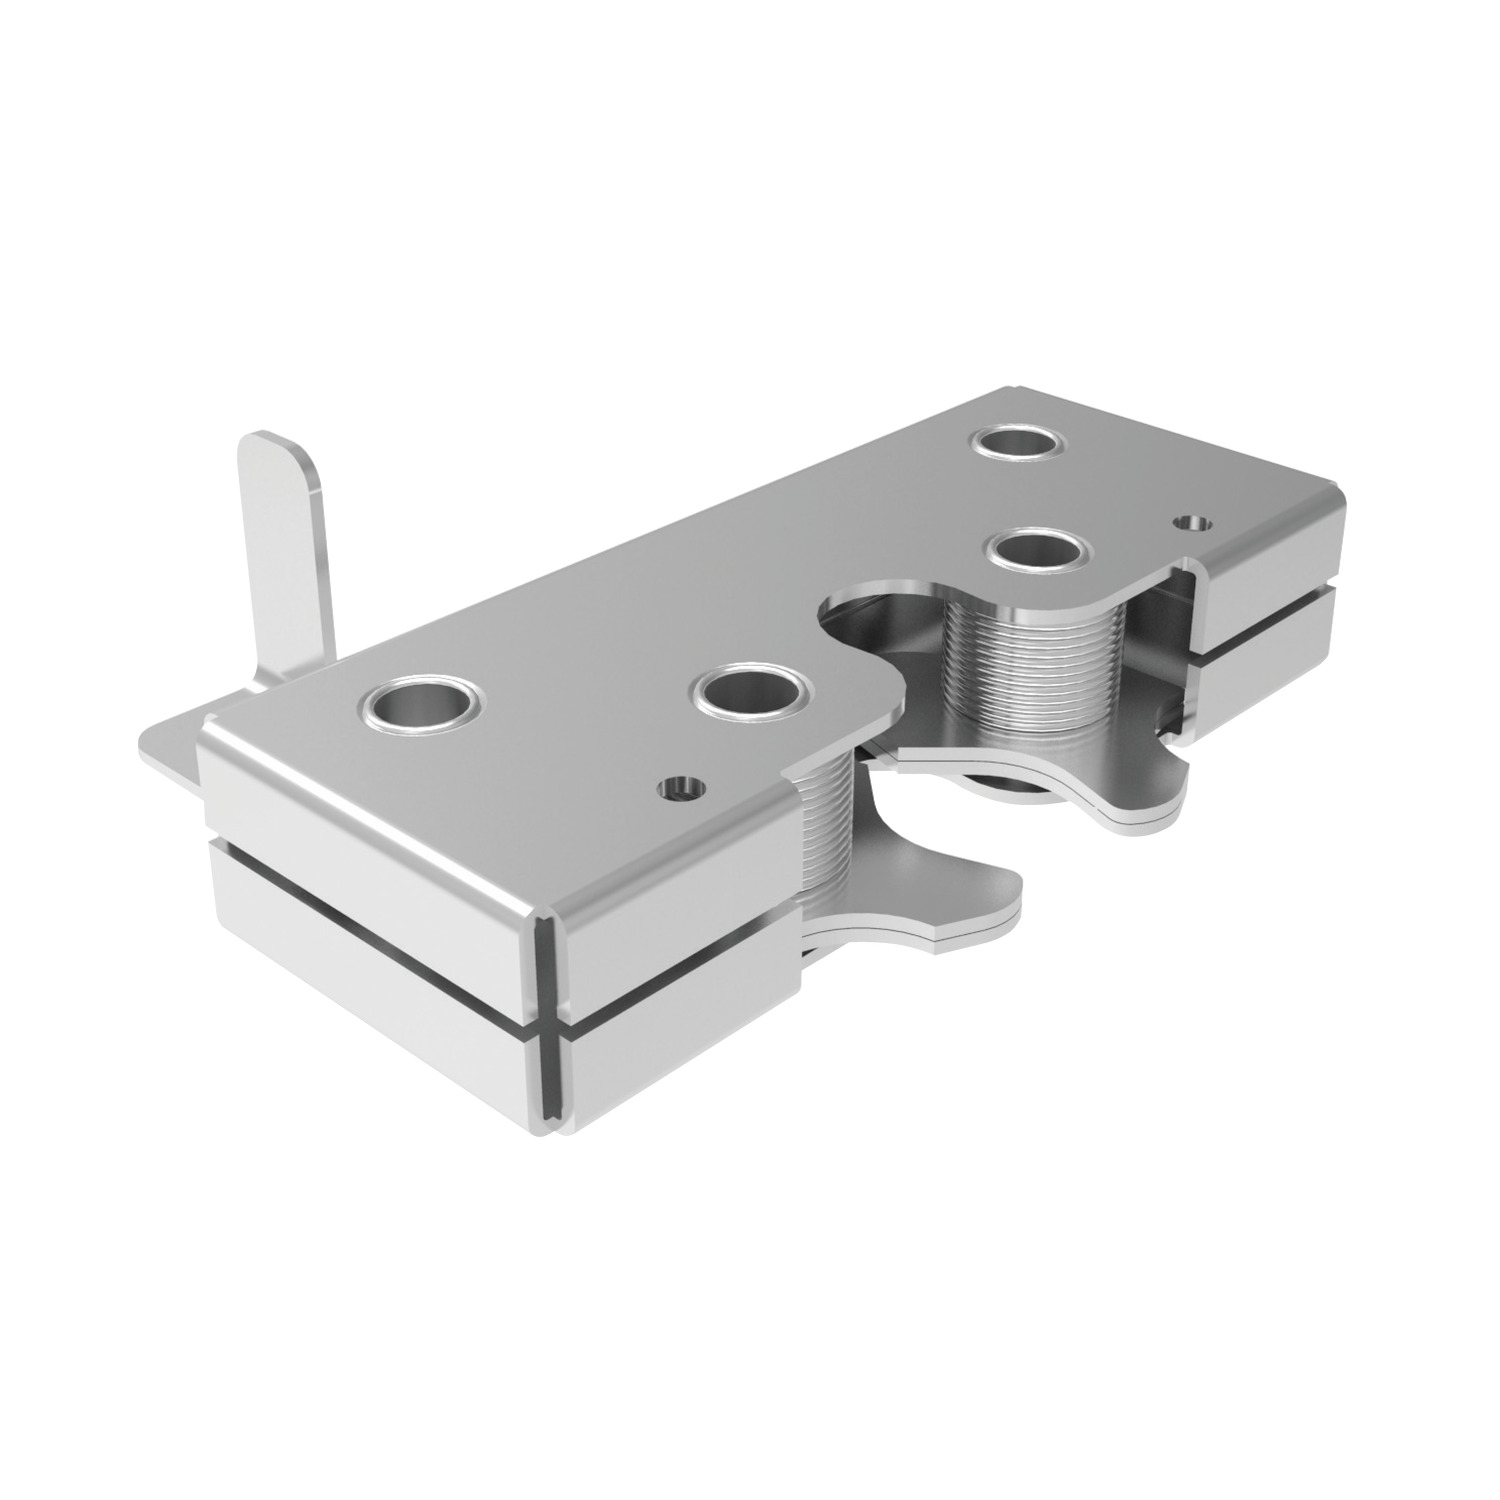 Tension Catches - Concealed Claw like tension catch, with release lever. For heavier duty applications. Upto 10,000 N load. Suitable for entry doors and barriers.